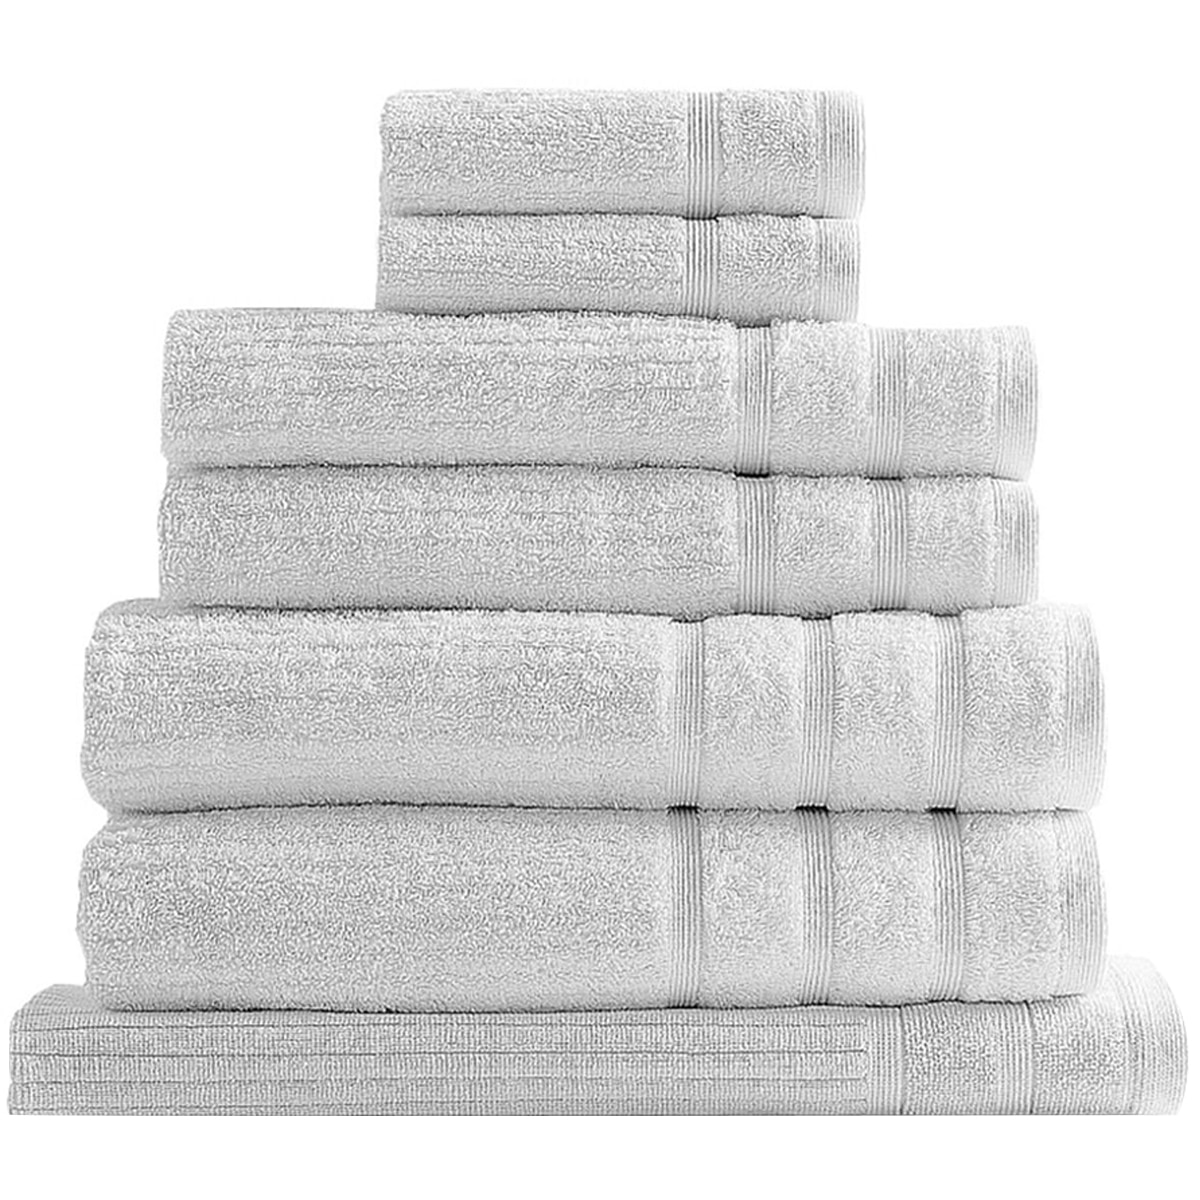 Bdirect Royal Comfort Eden 600GSM 100% Cotton 8 Piece Towel Pack - White